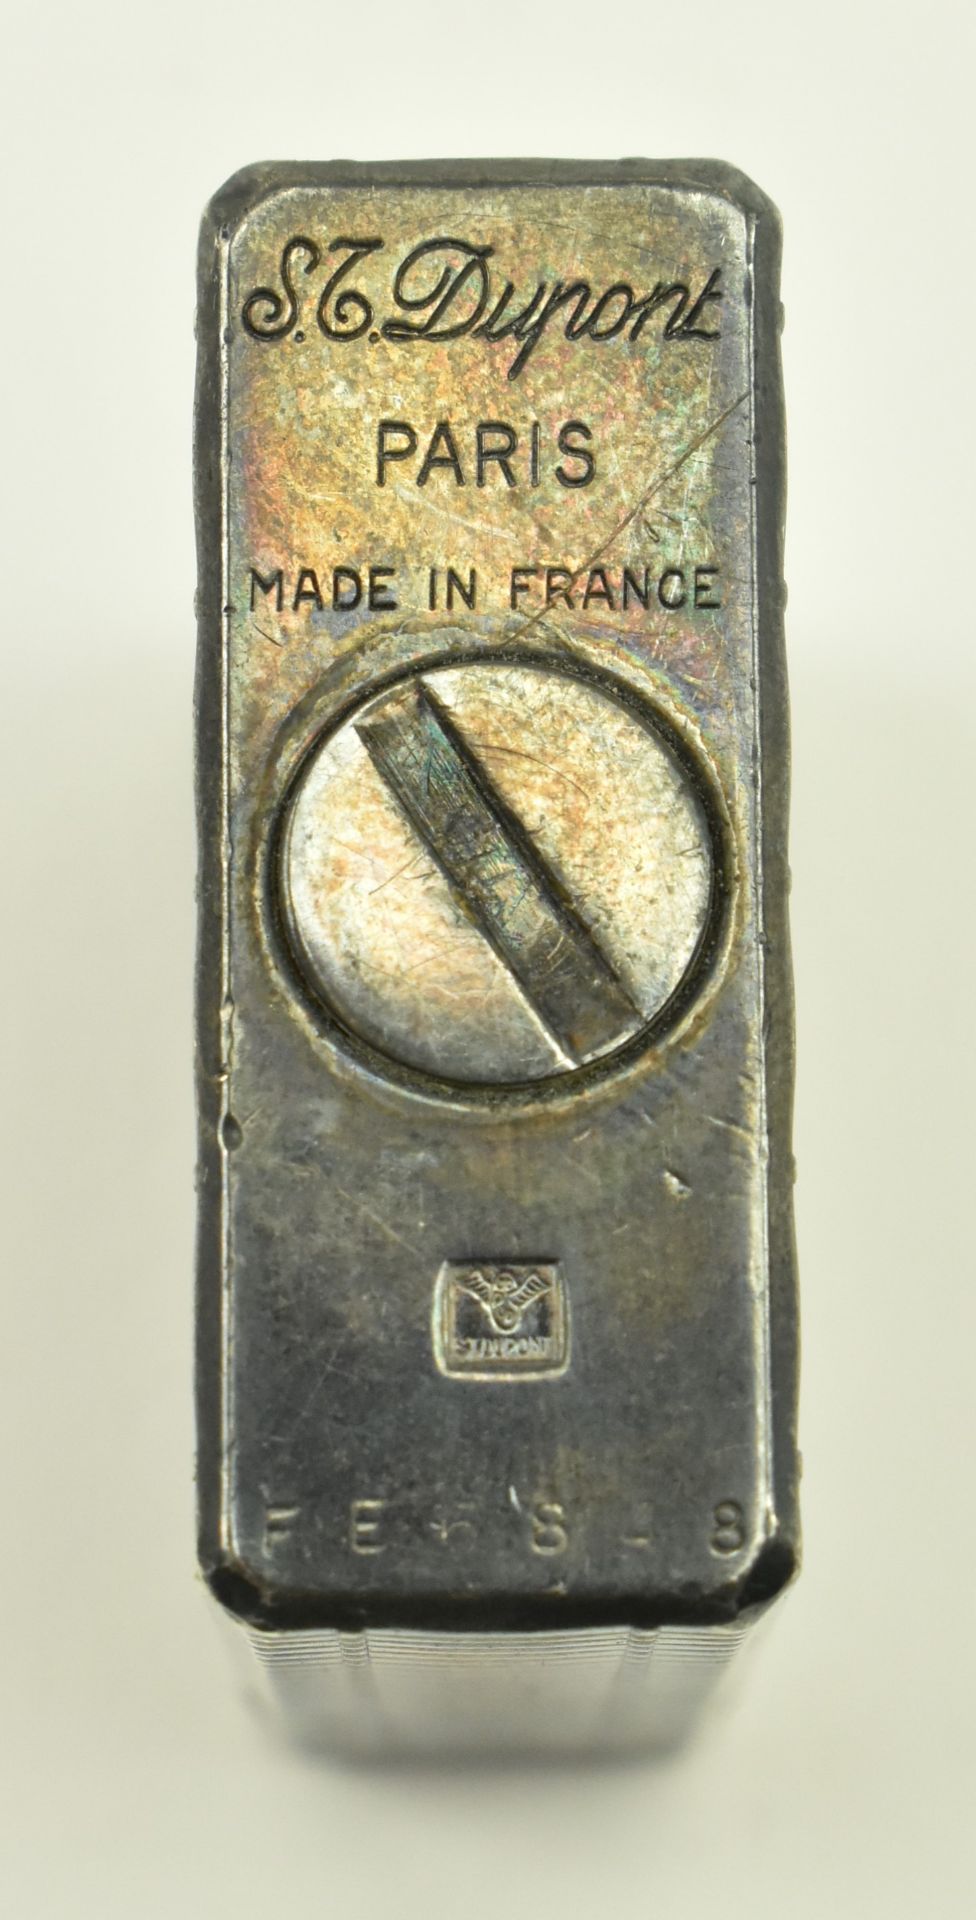 20TH CENTURY DUPONT SILVER PLATED CIGARETTE LIGHTER - Image 4 of 4